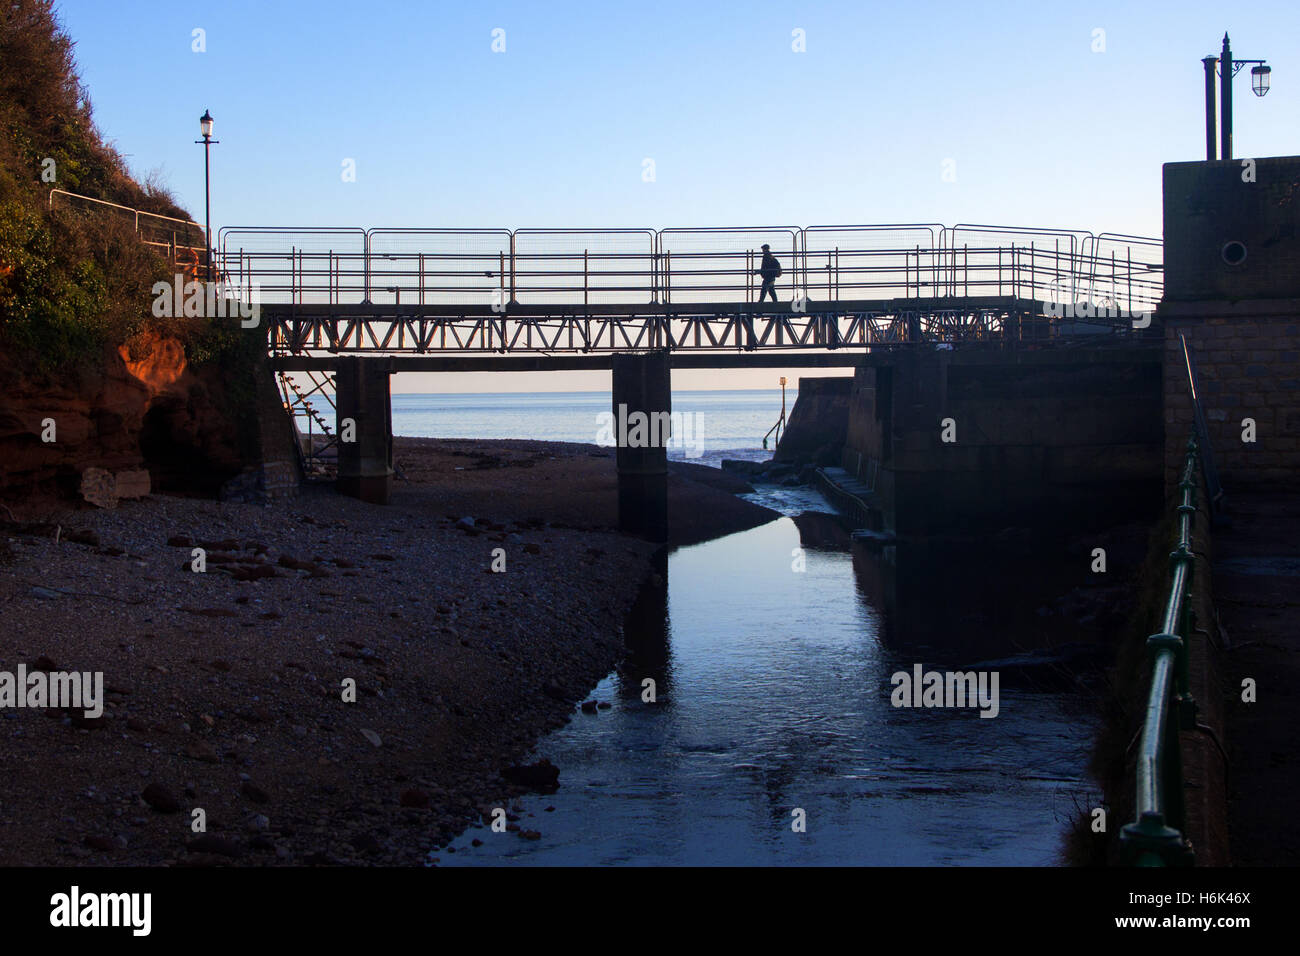 Sidmouth. The Alma bridge over the River Sid at Sidmouth, Devon, a temporary structure soon to be moved up river due to cliff erosion. Stock Photo